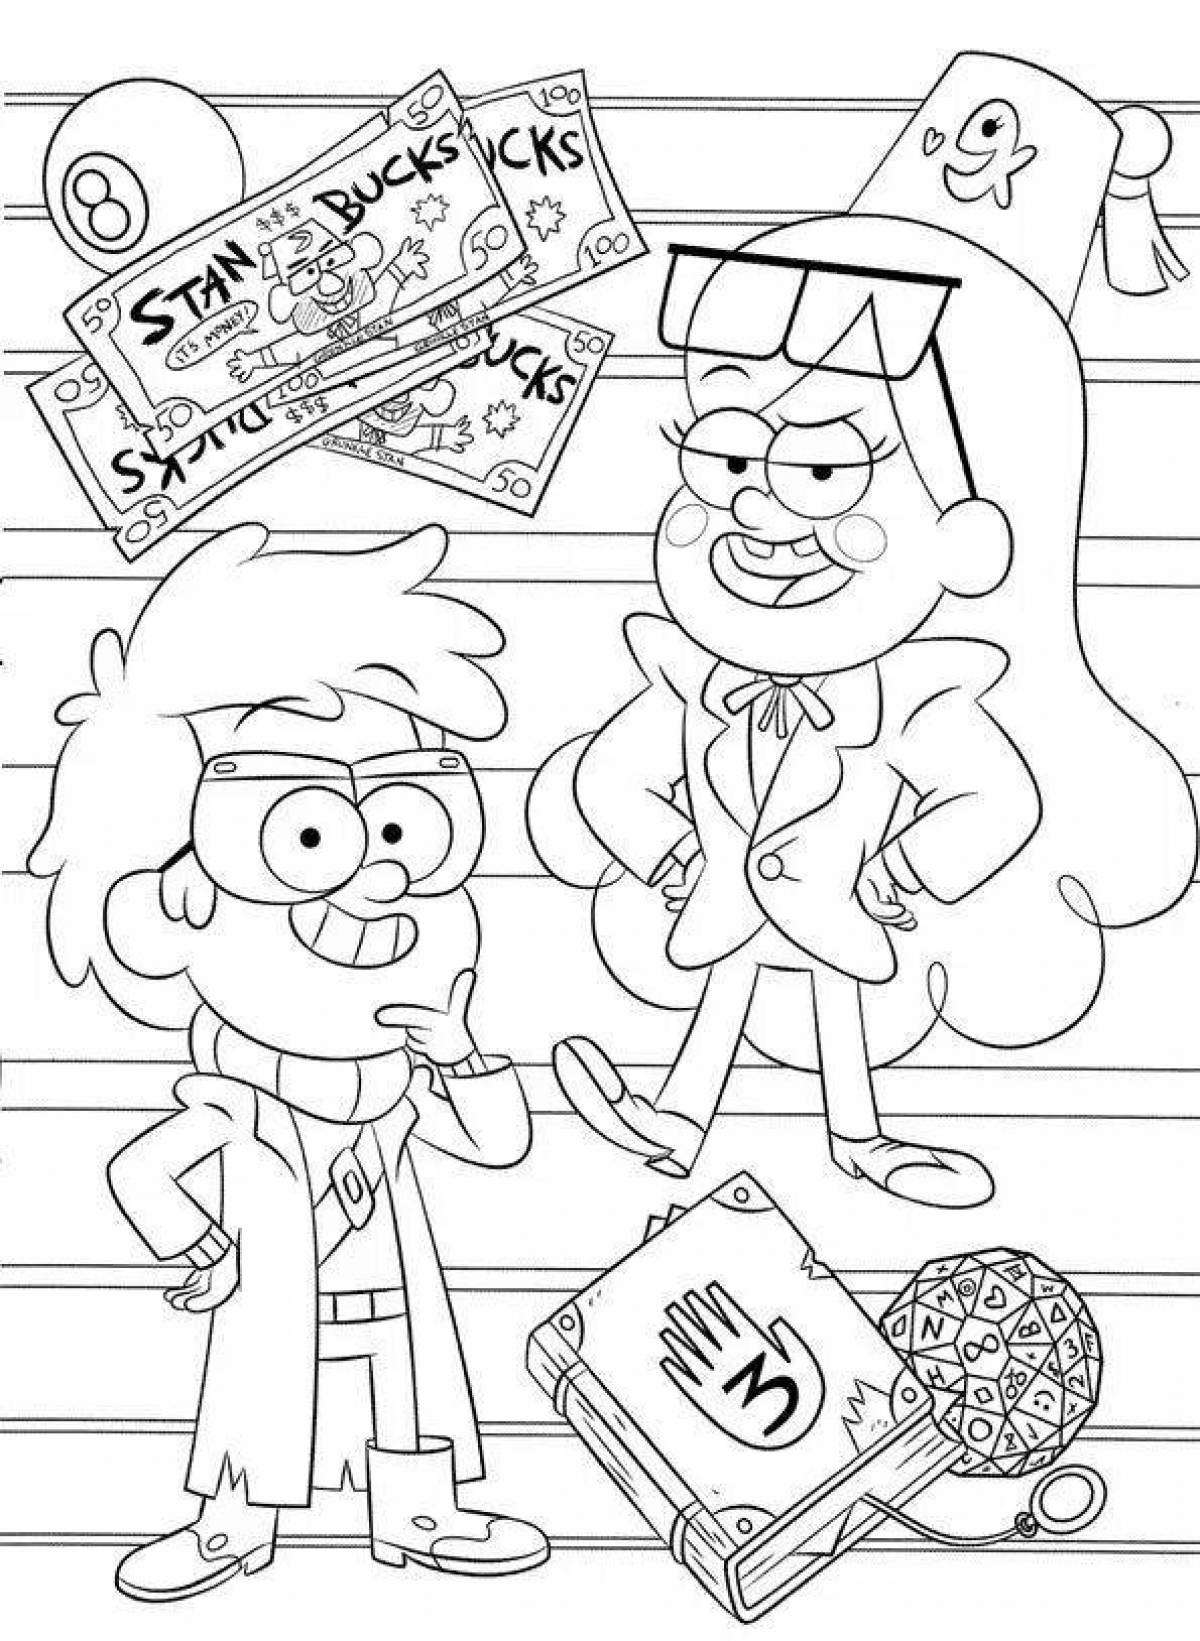 Gravity Falls diary coloring page